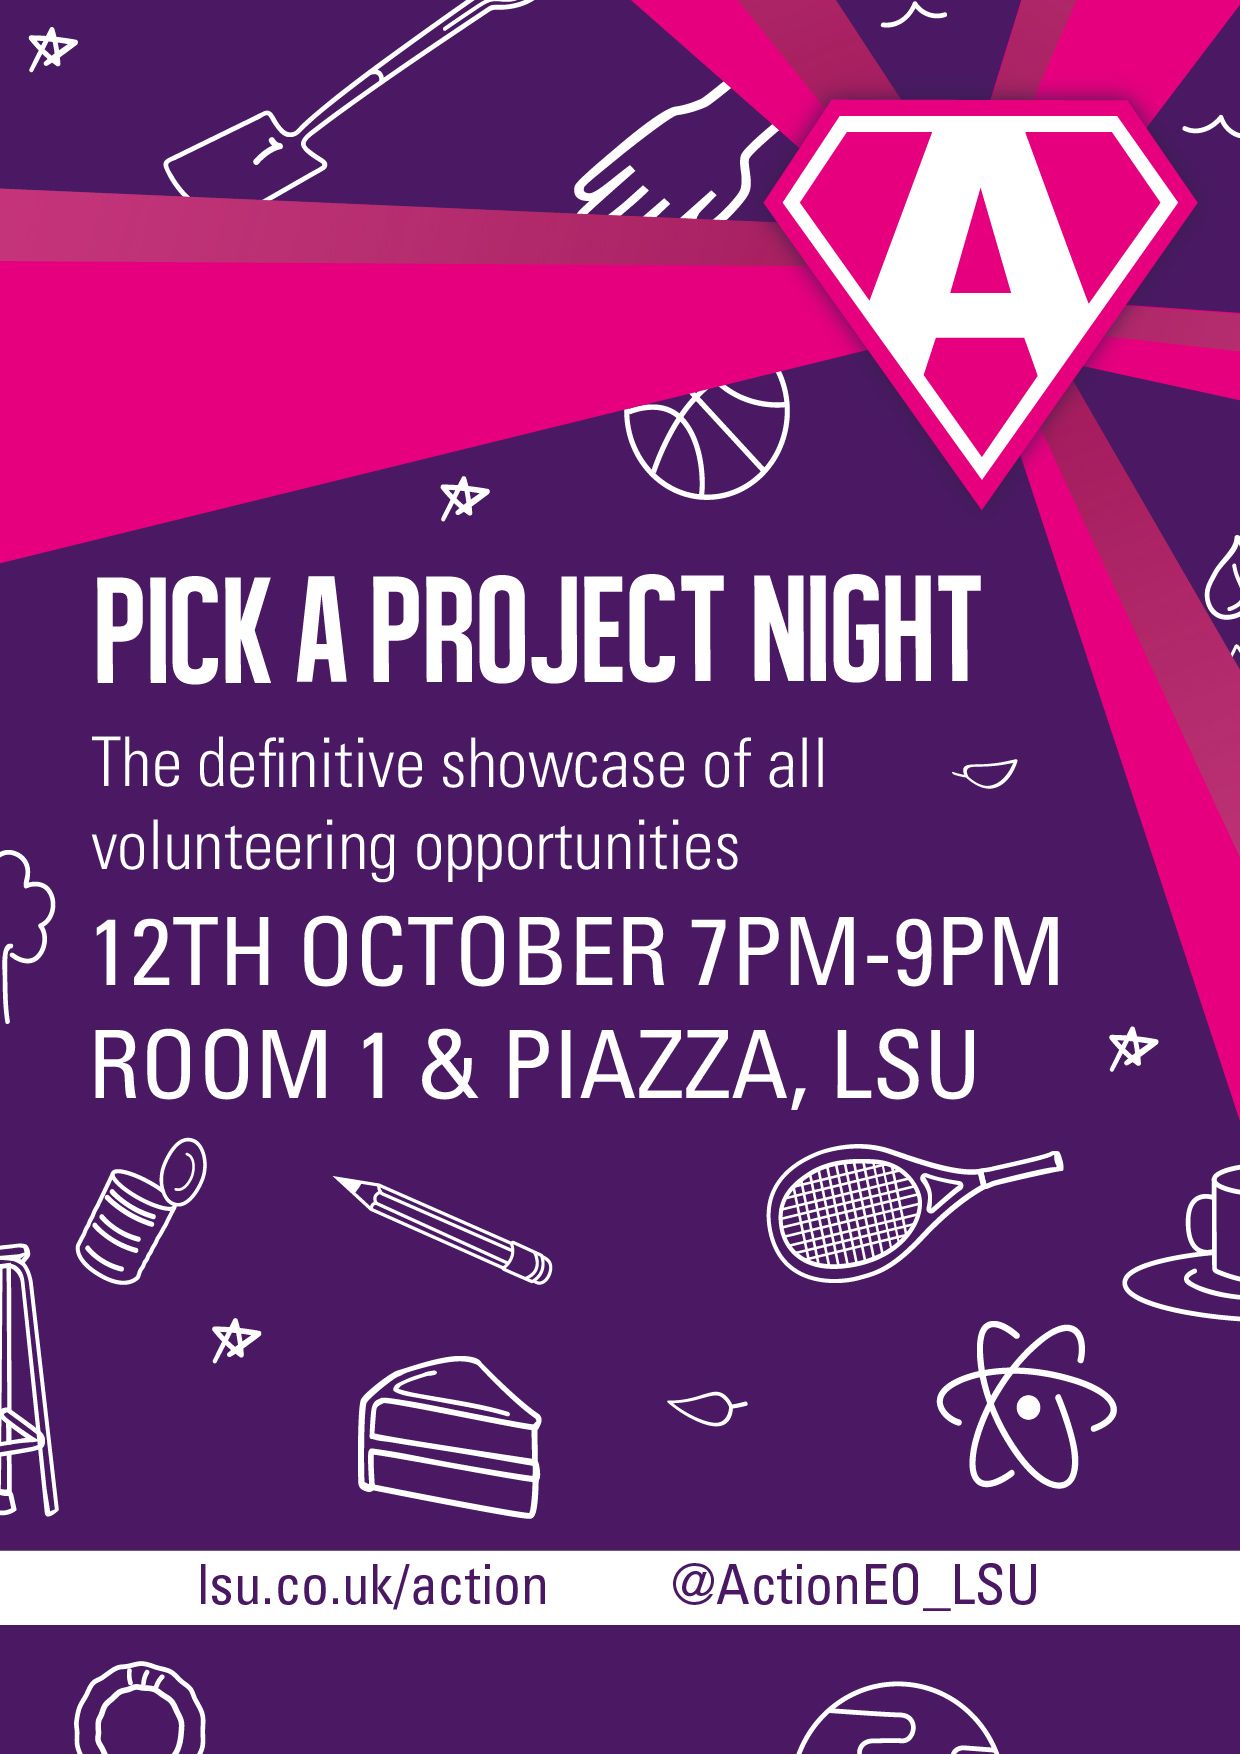 poster advertising Pick a Project evening